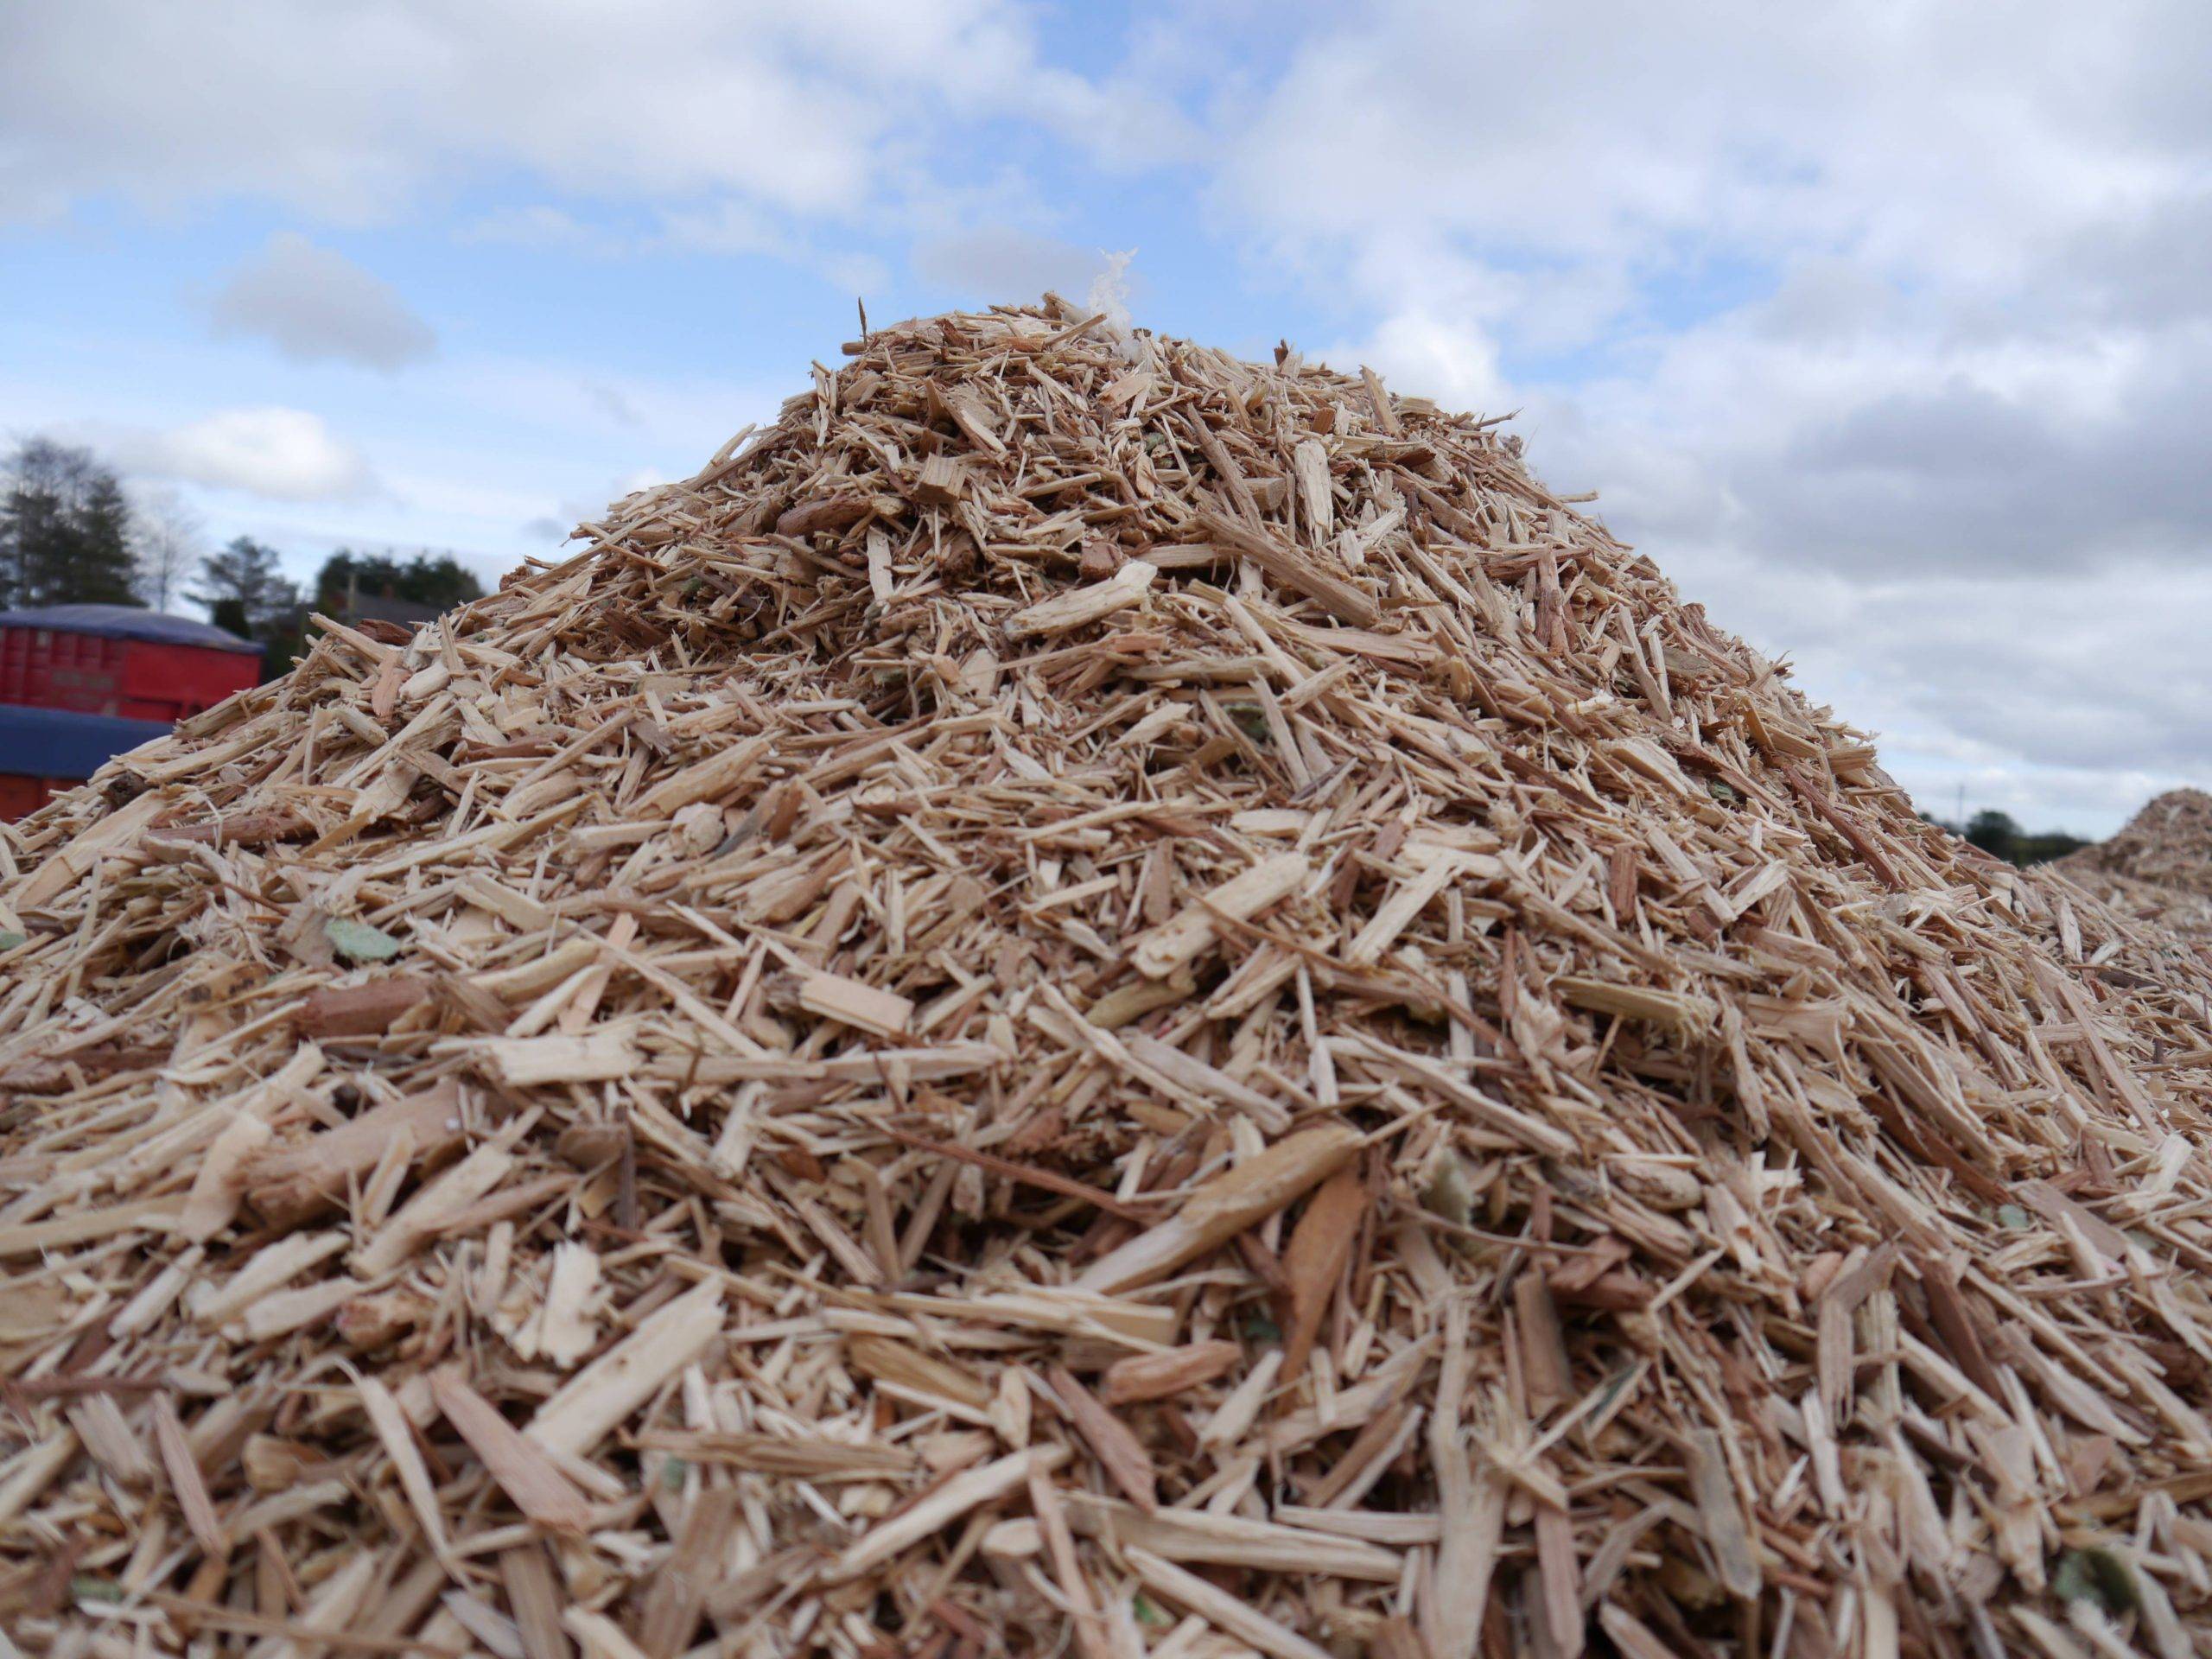 Biomass Fuel Helps with Net Zero Emissions Target